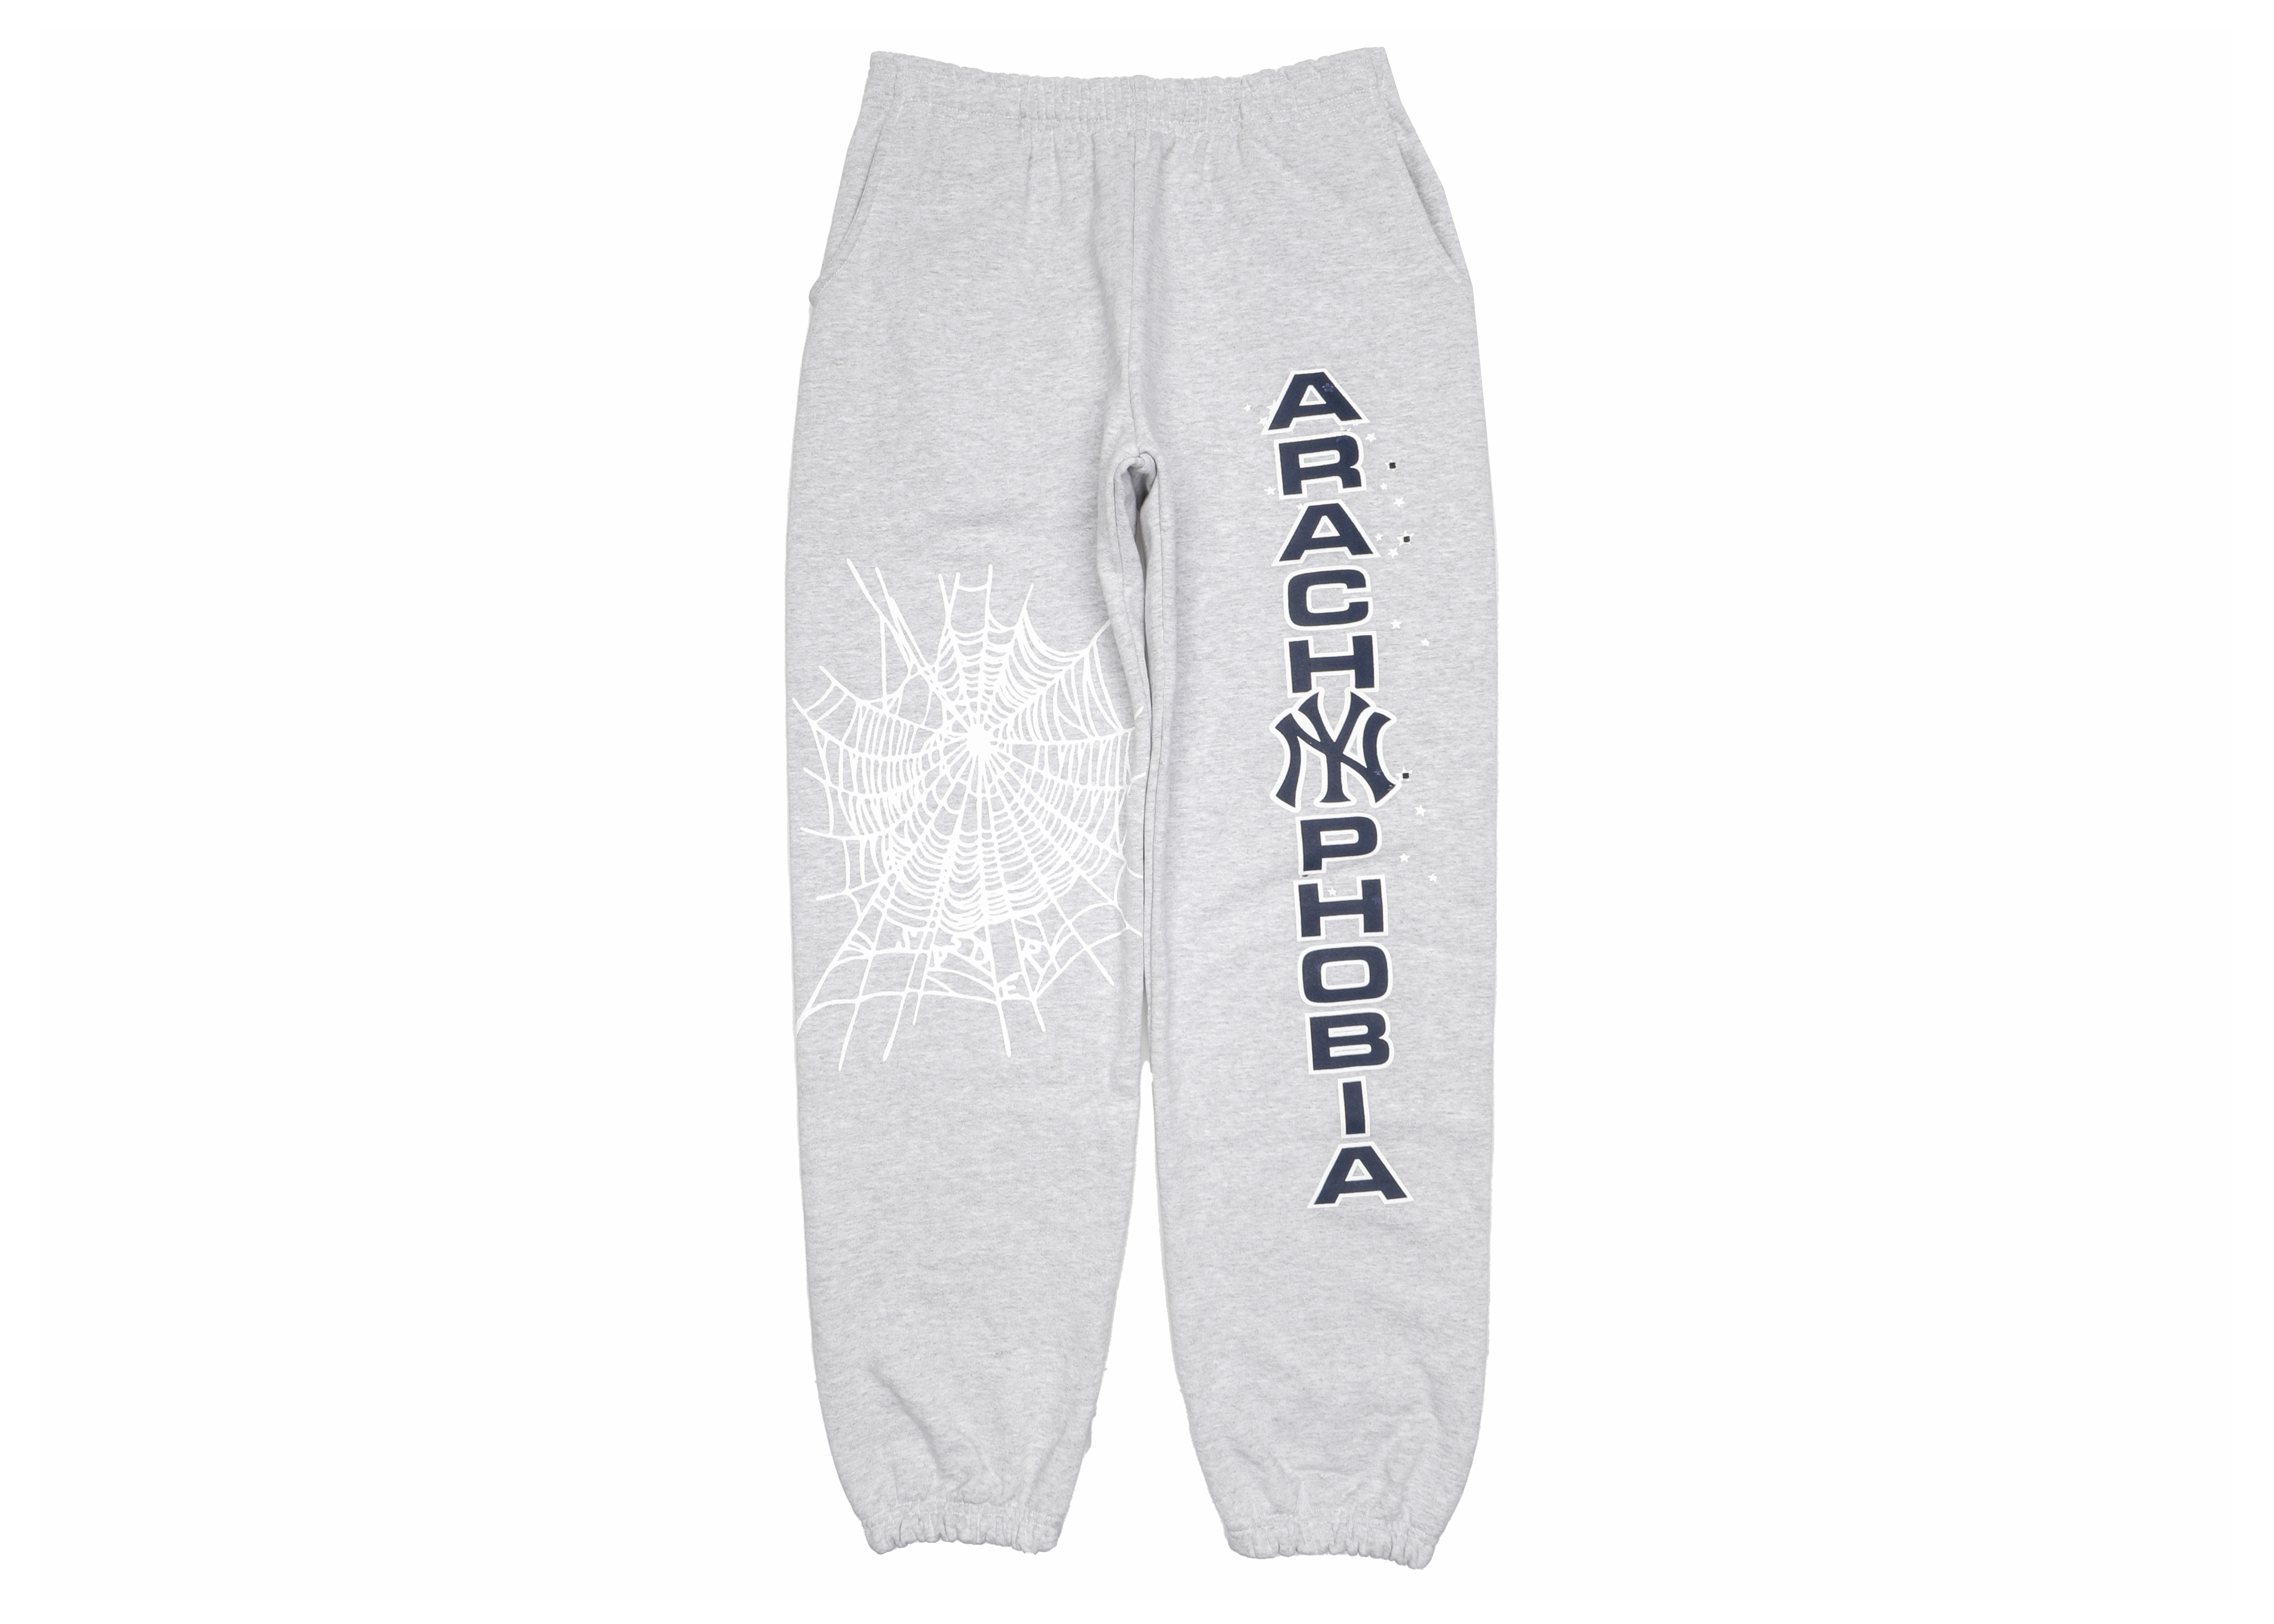 Sp5der Arach NY Phobia セットアップトップス